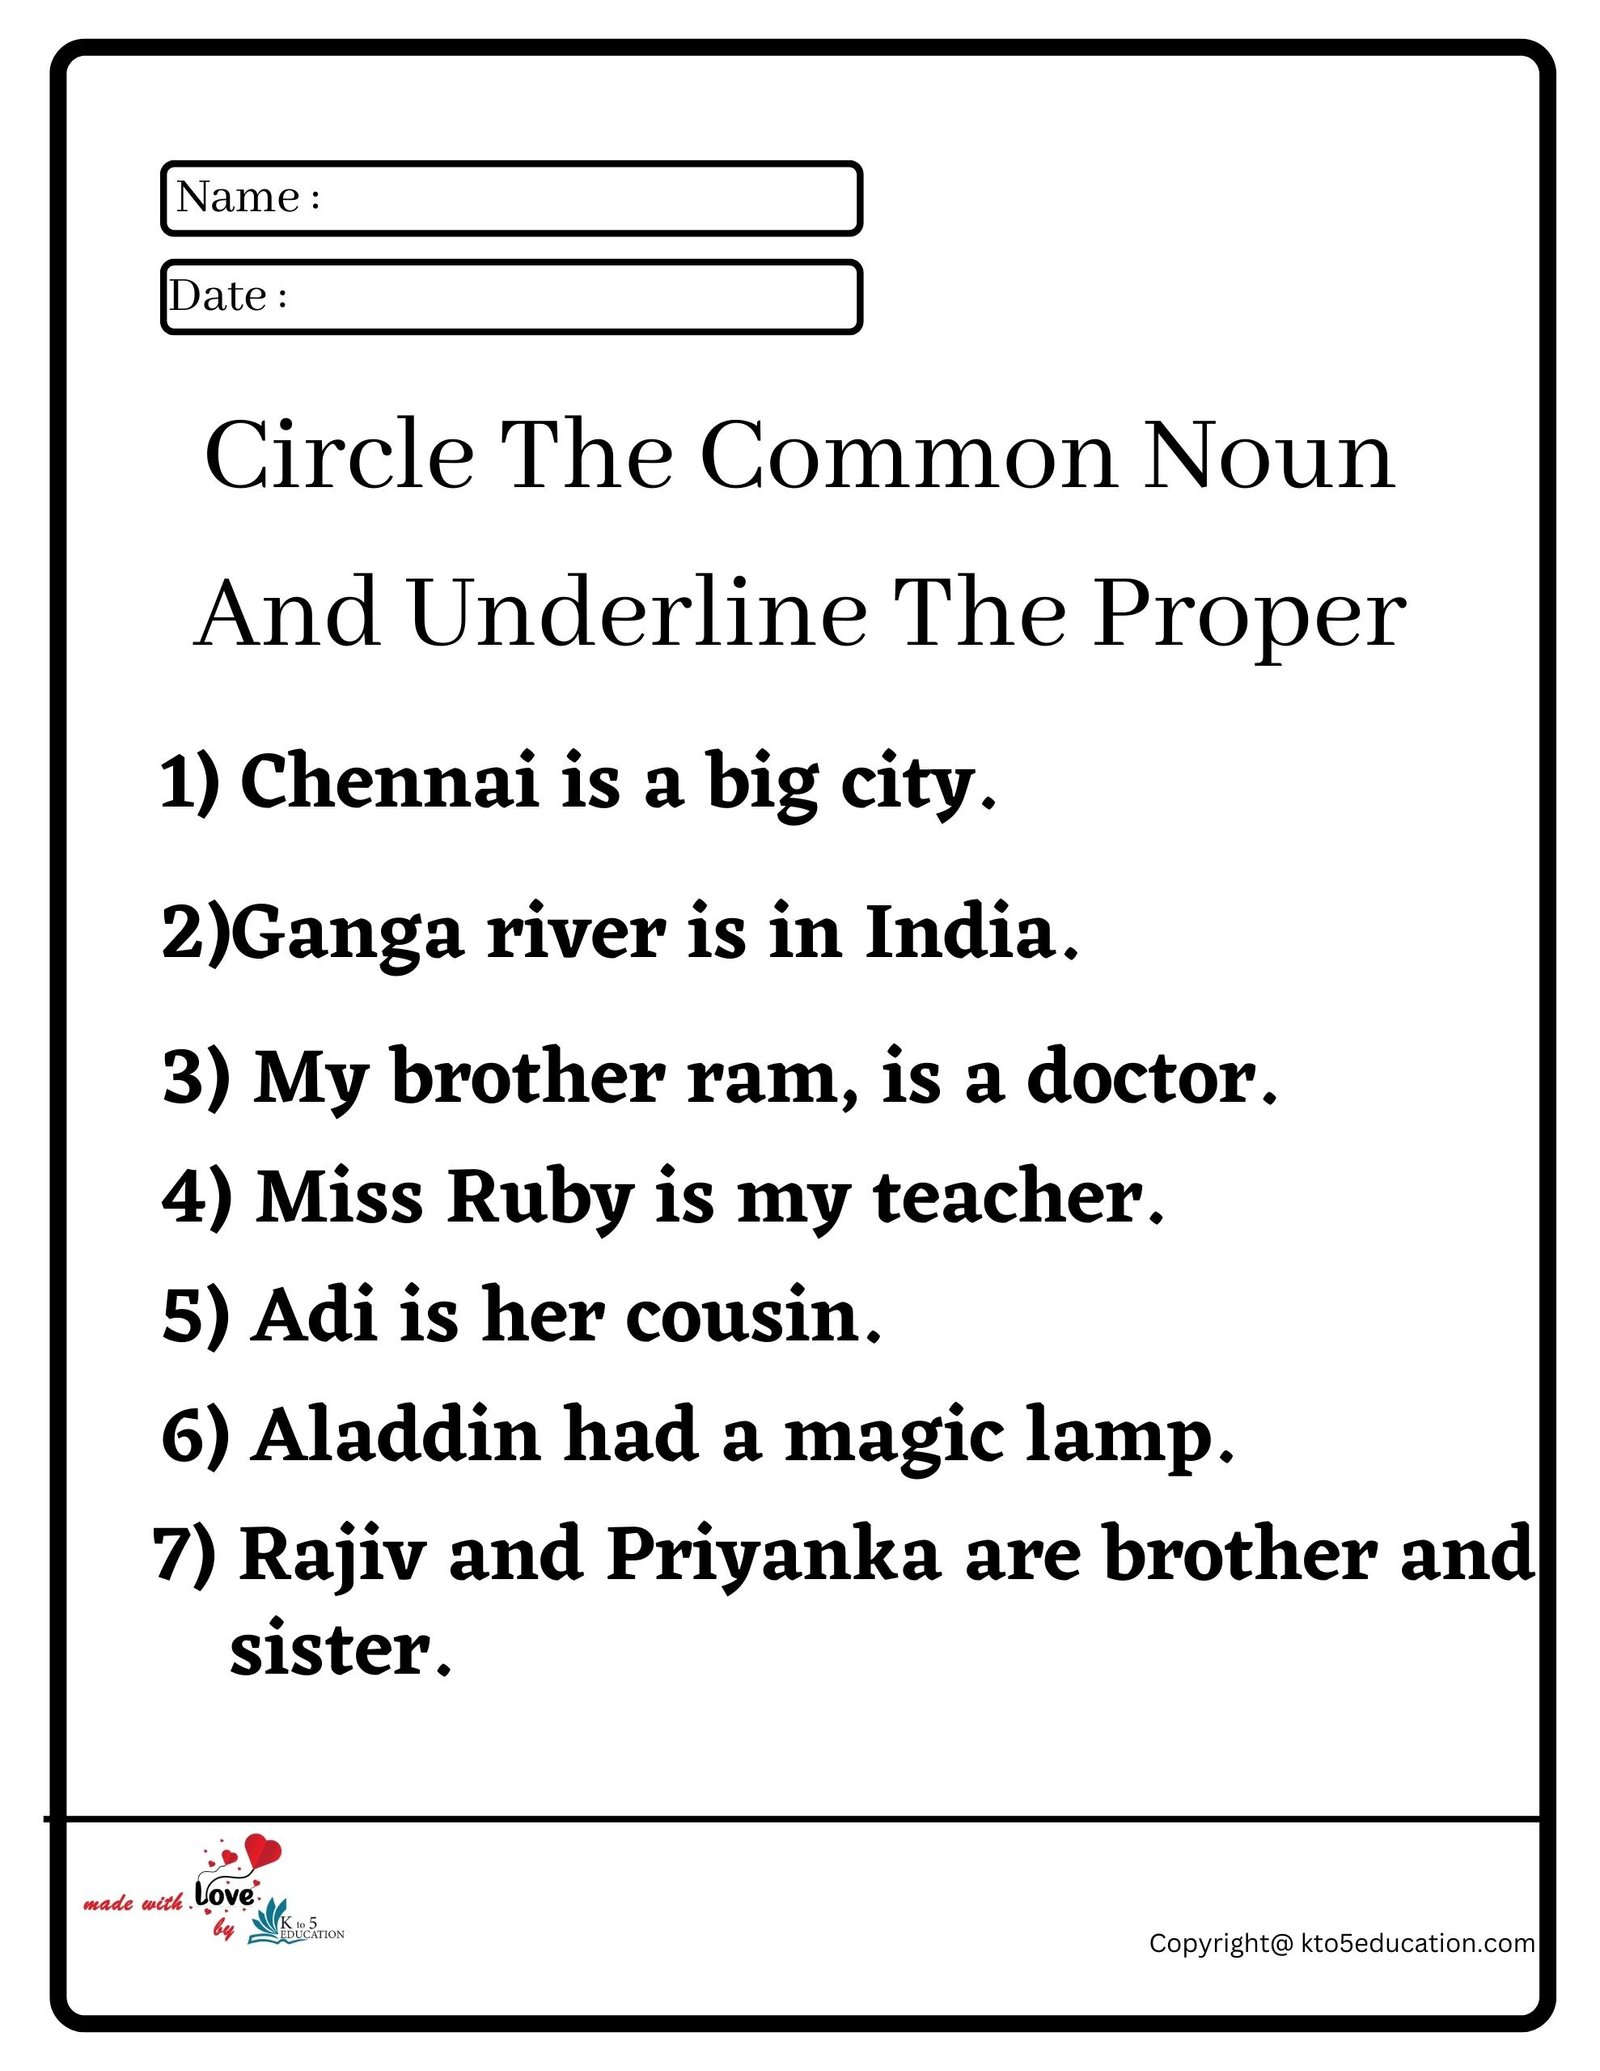 Circle The Common Noun And Underline The Proper Worksheet 2